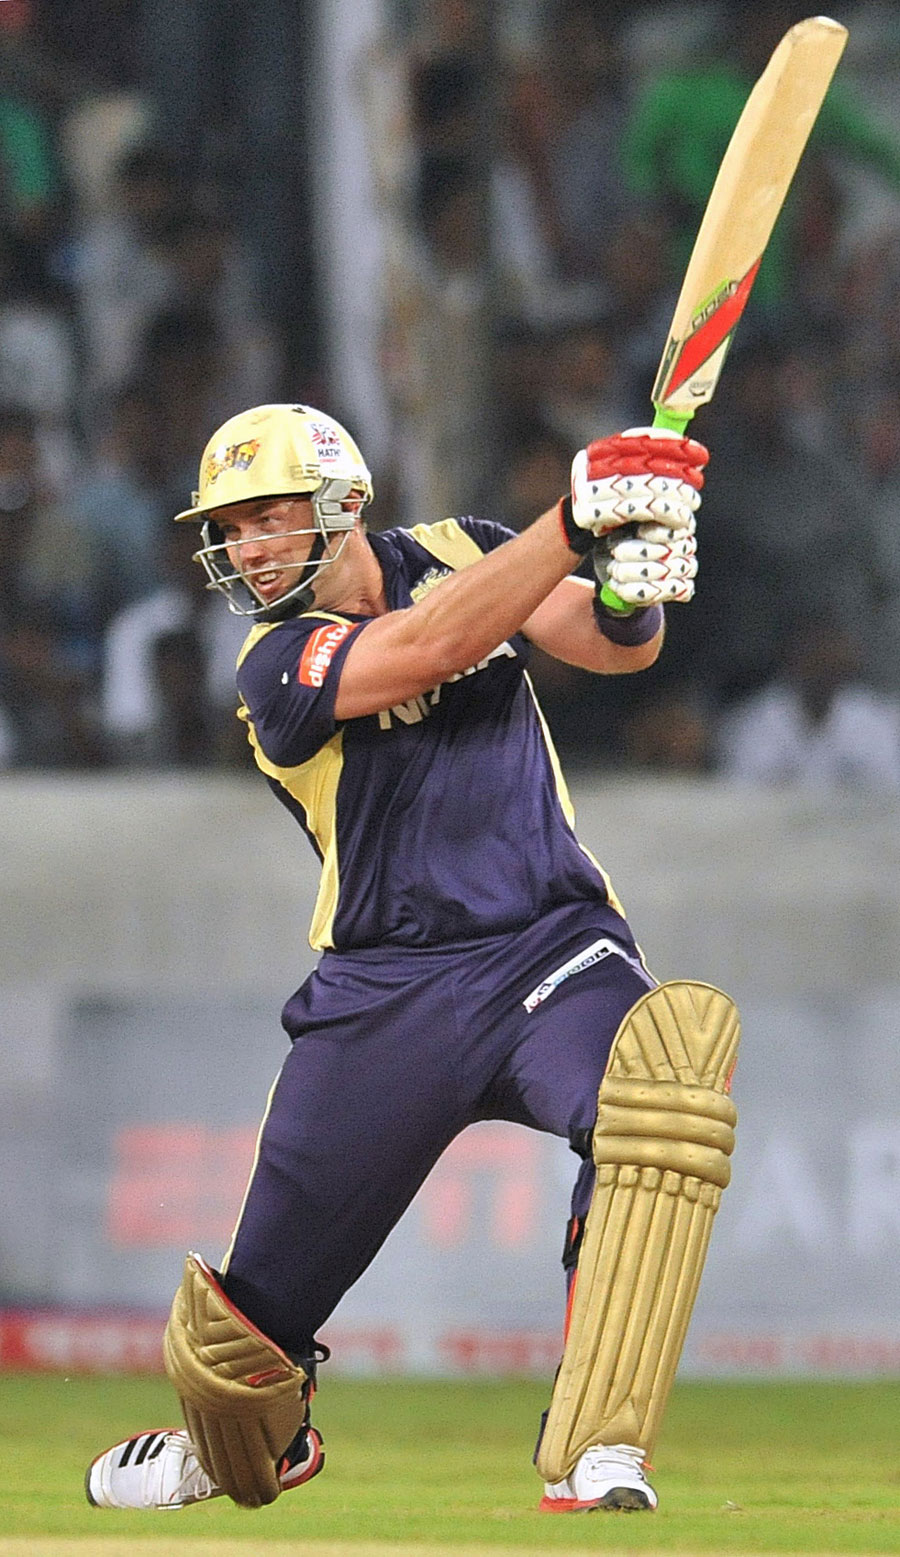 The only point to be happy with is we will still get to see Kallis play the T20 leagues. | Photo Source: Cricinfo